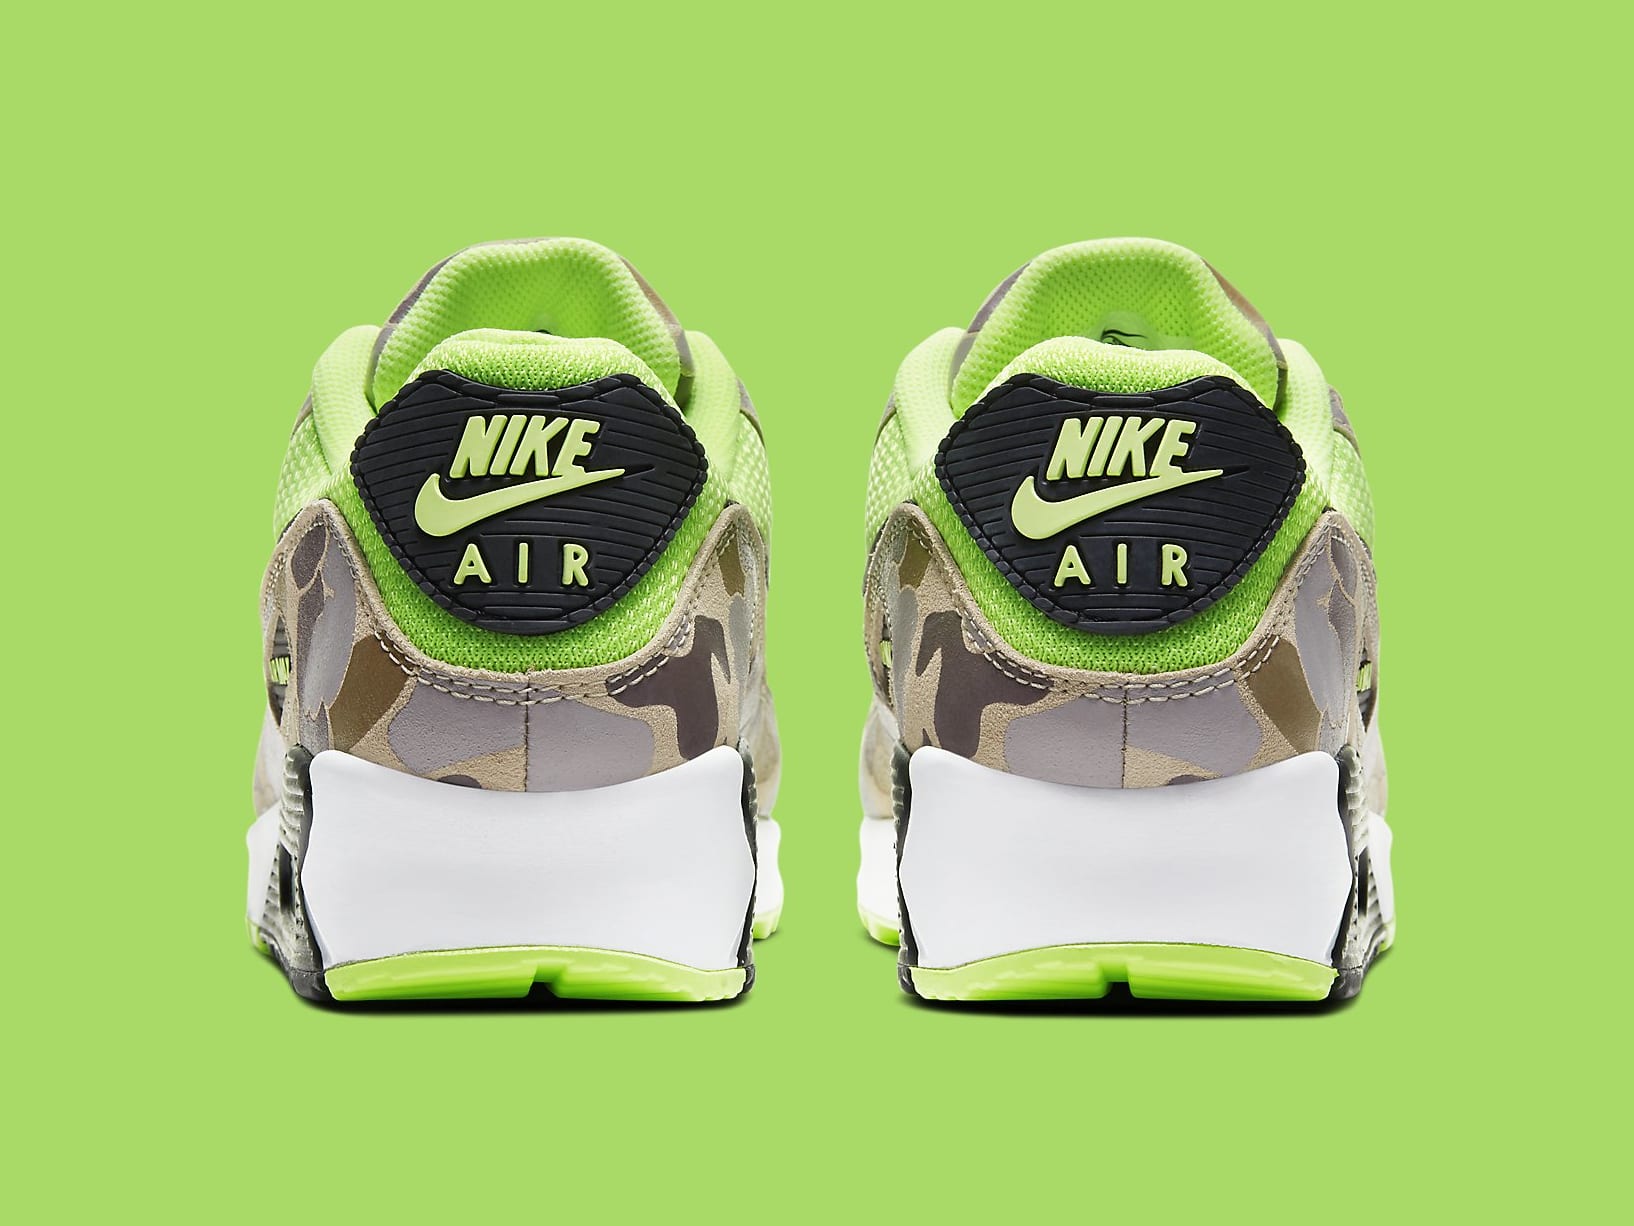 Nike Air Max 90 Volt Duck Camo Ghost Green Release Date CW4039-300 Heel